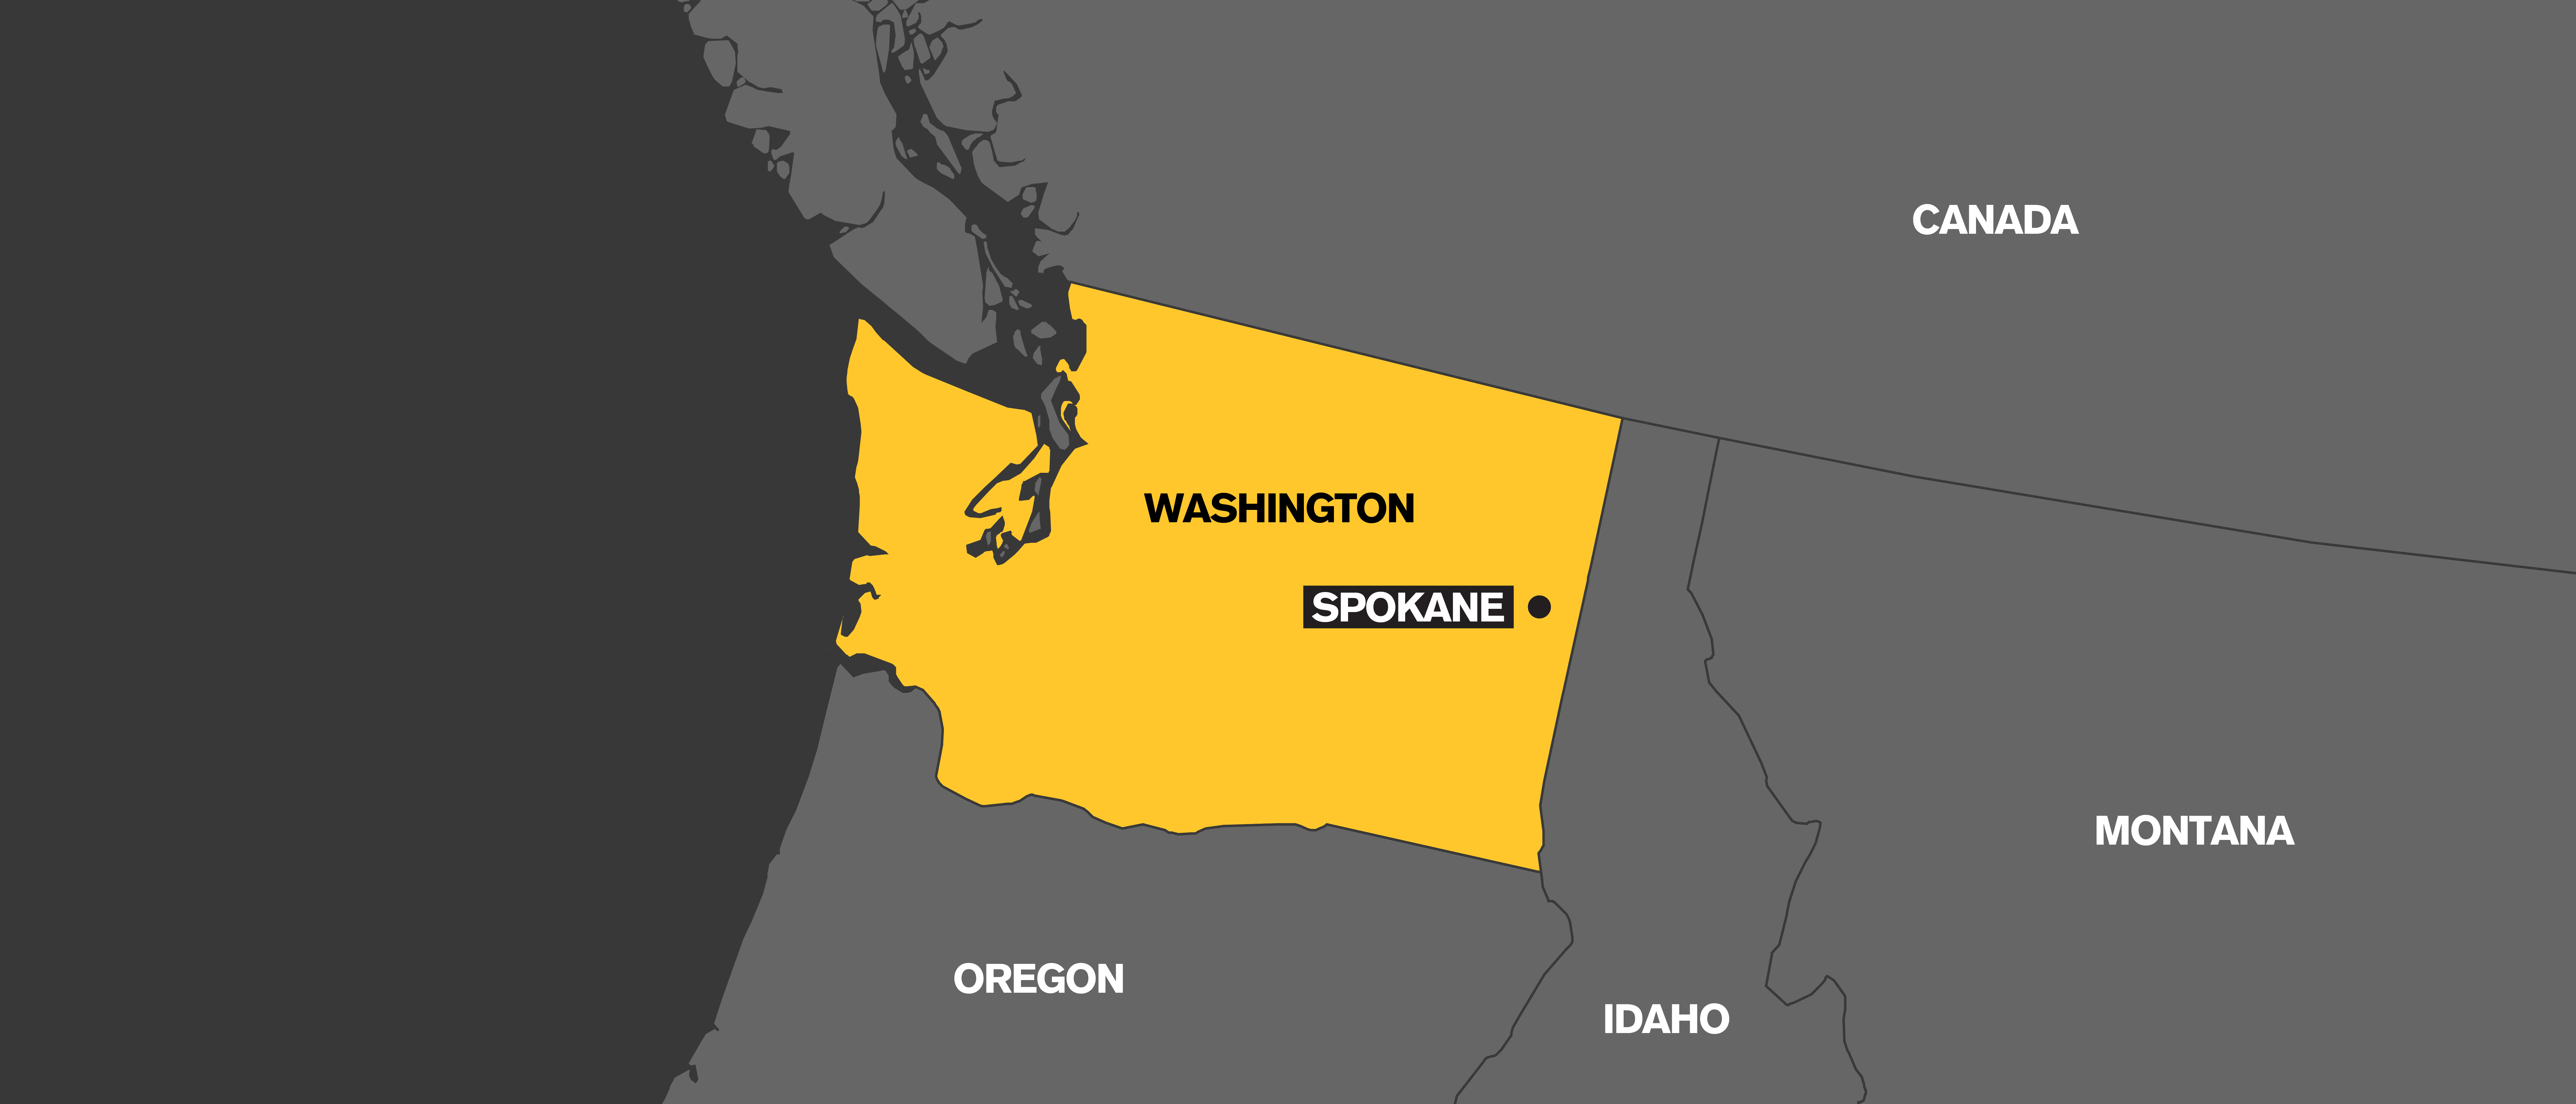 A map which highlights the state of Washington in yellow.